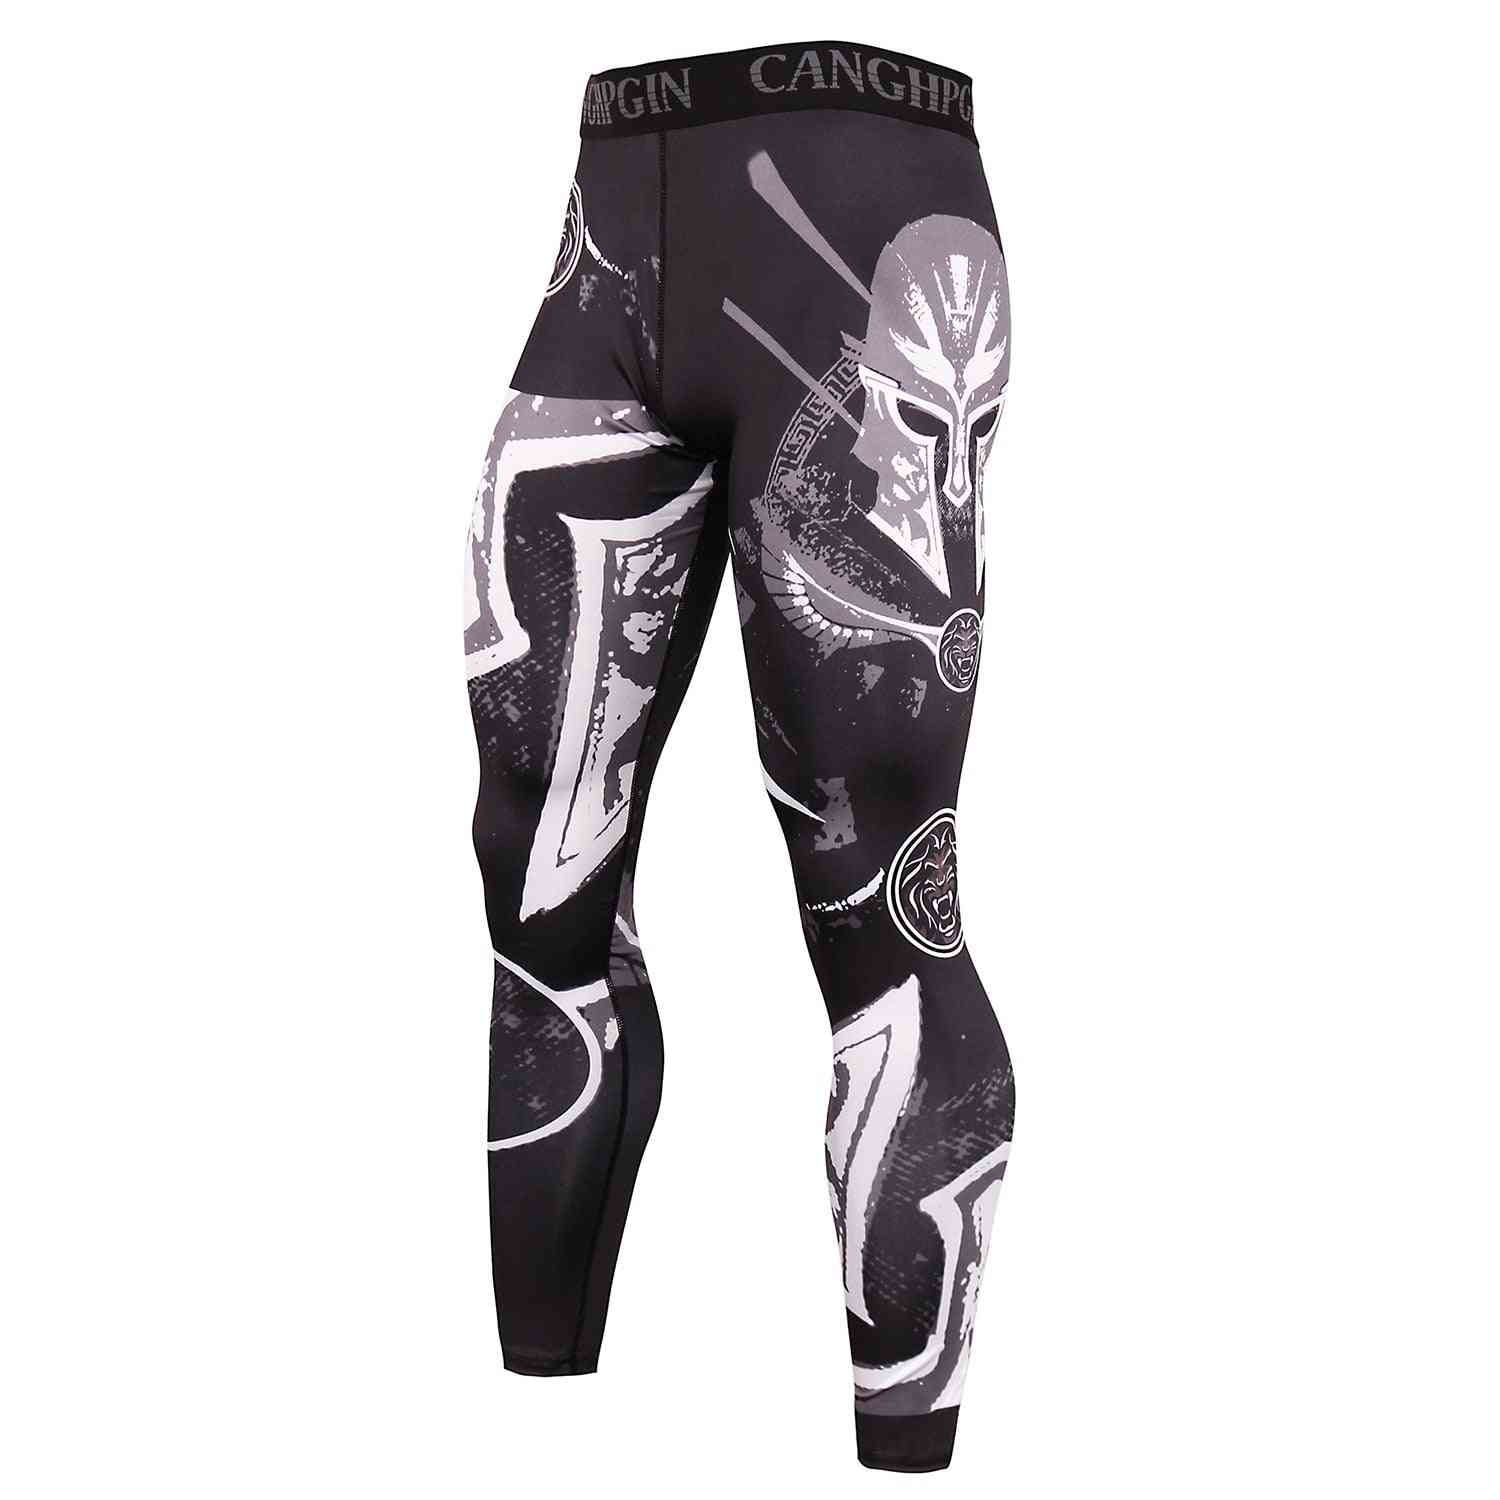 New Sport Running Tights Trousers Pants